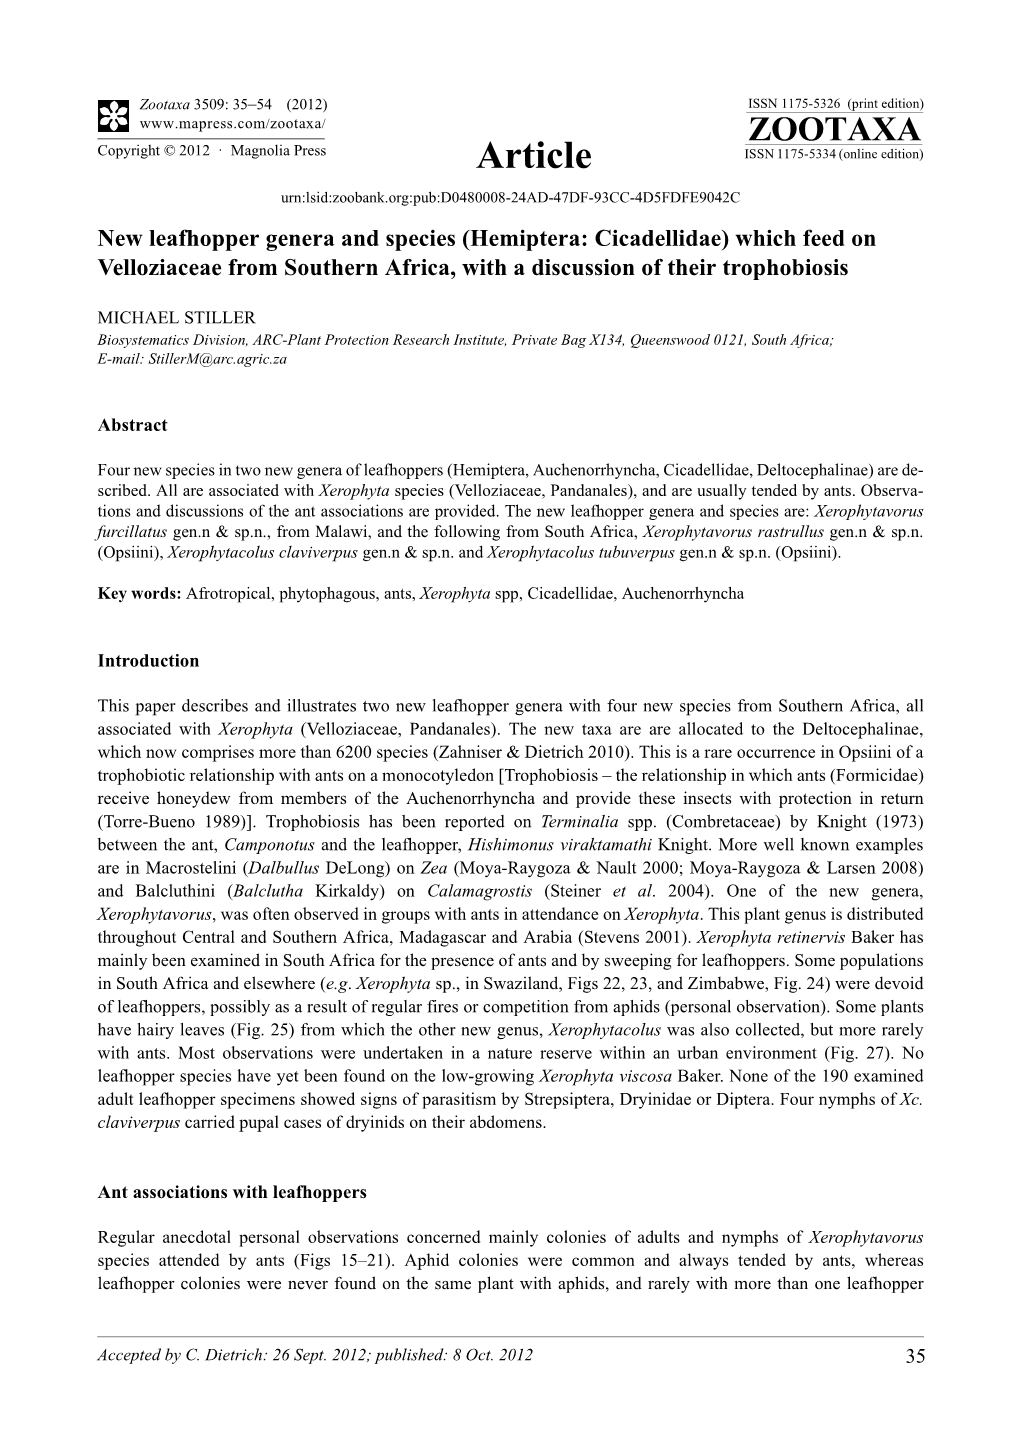 New Leafhopper Genera and Species (Hemiptera: Cicadellidae) Which Feed on Velloziaceae from Southern Africa, with a Discussion of Their Trophobiosis